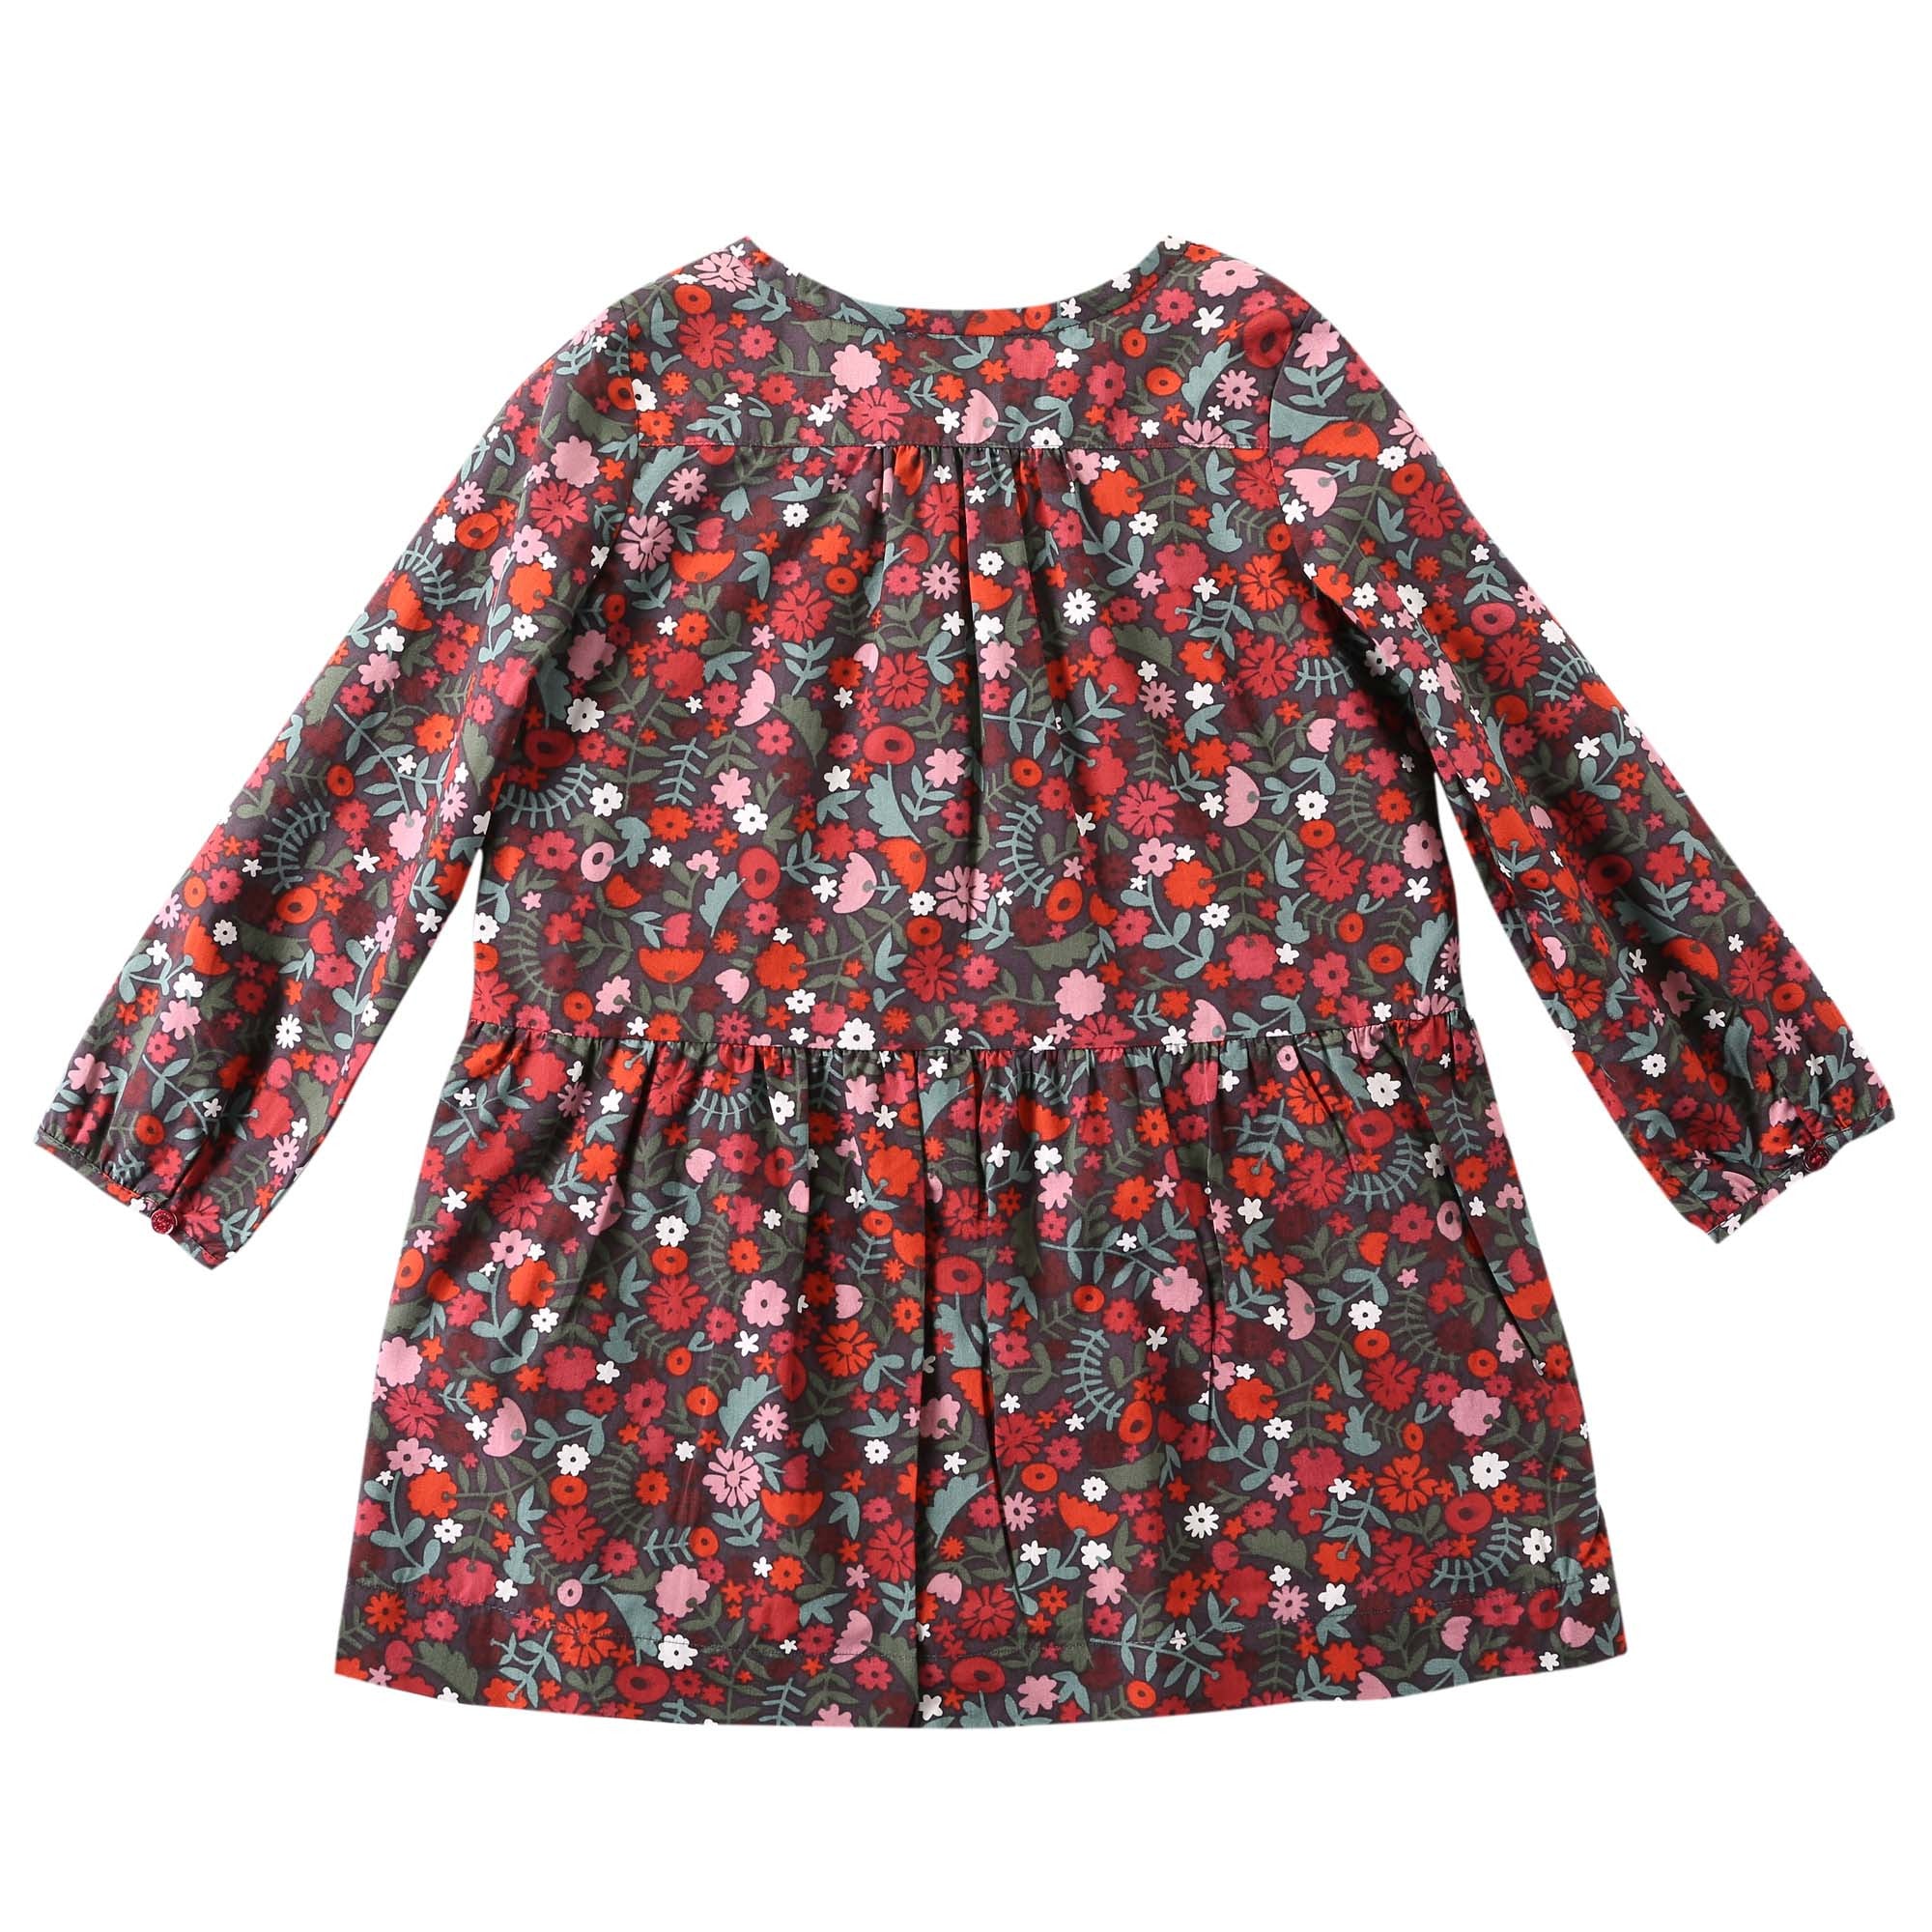 Baby Girls Antique Red Floral Printed Trims Dress - CÉMAROSE | Children's Fashion Store - 2